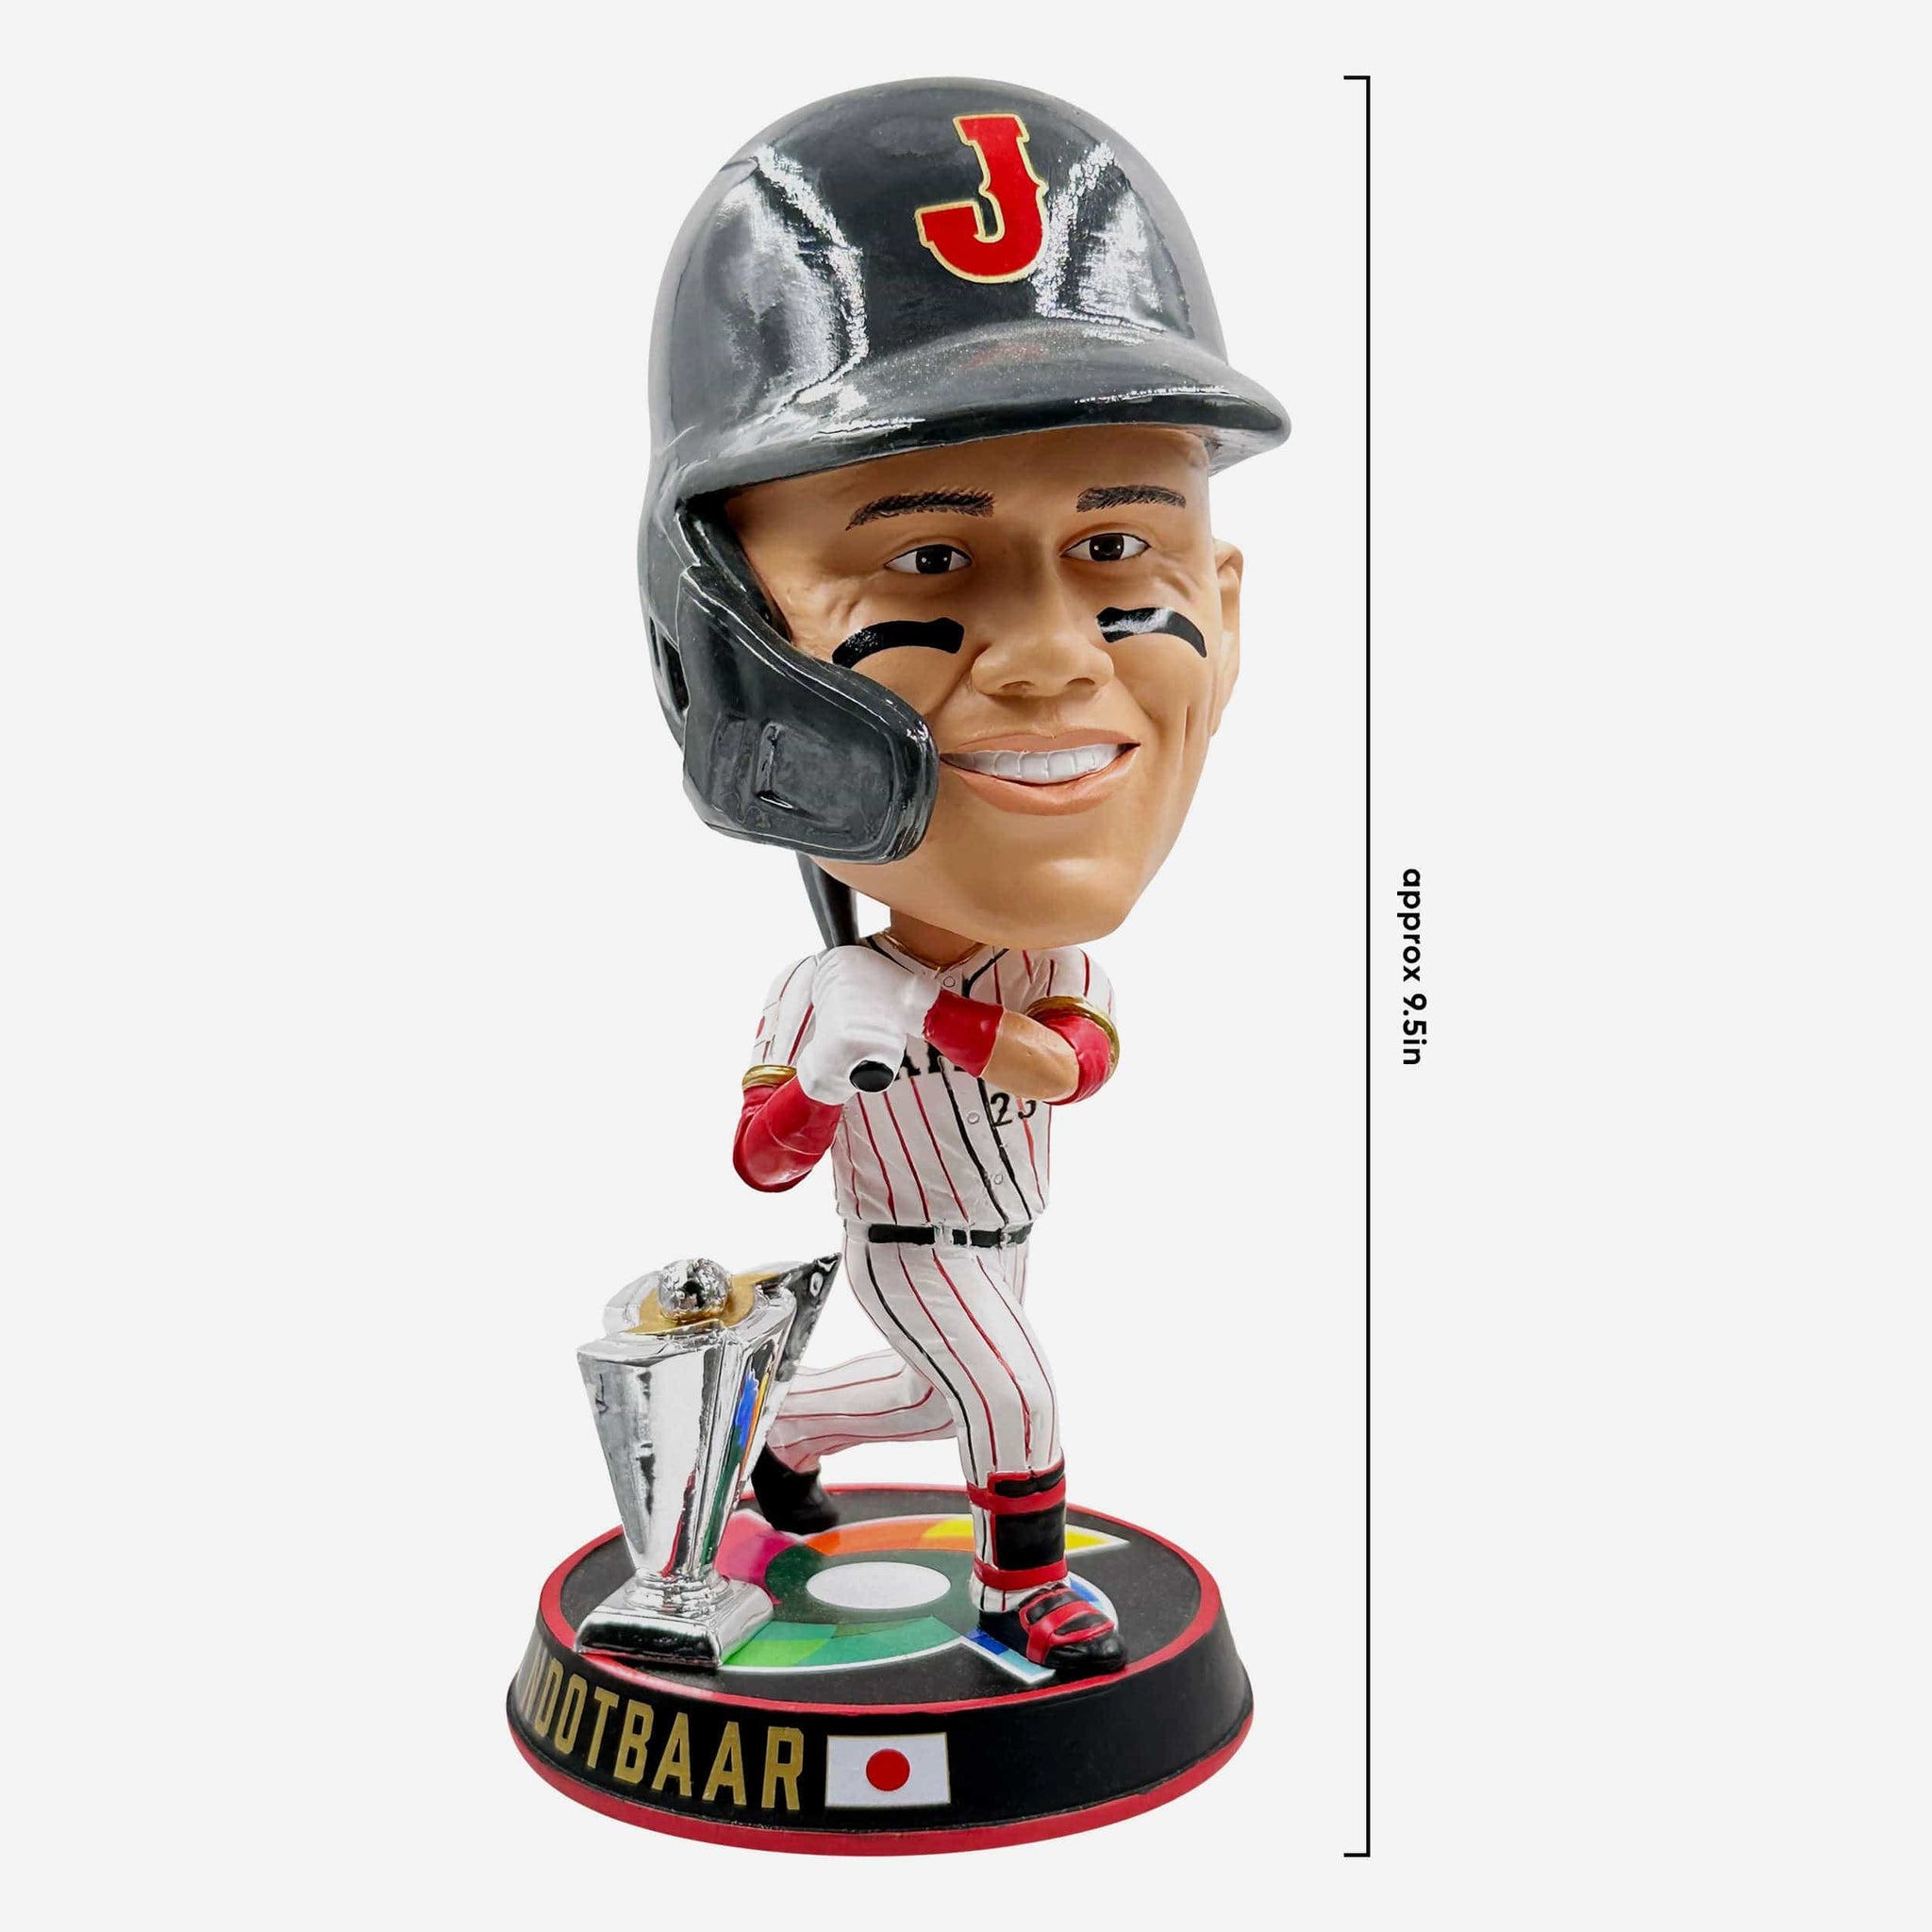 Lars Nootbaar “Grind the Pepper” Bobbleheads unveiled - Guarantee yours now  before they sell out!